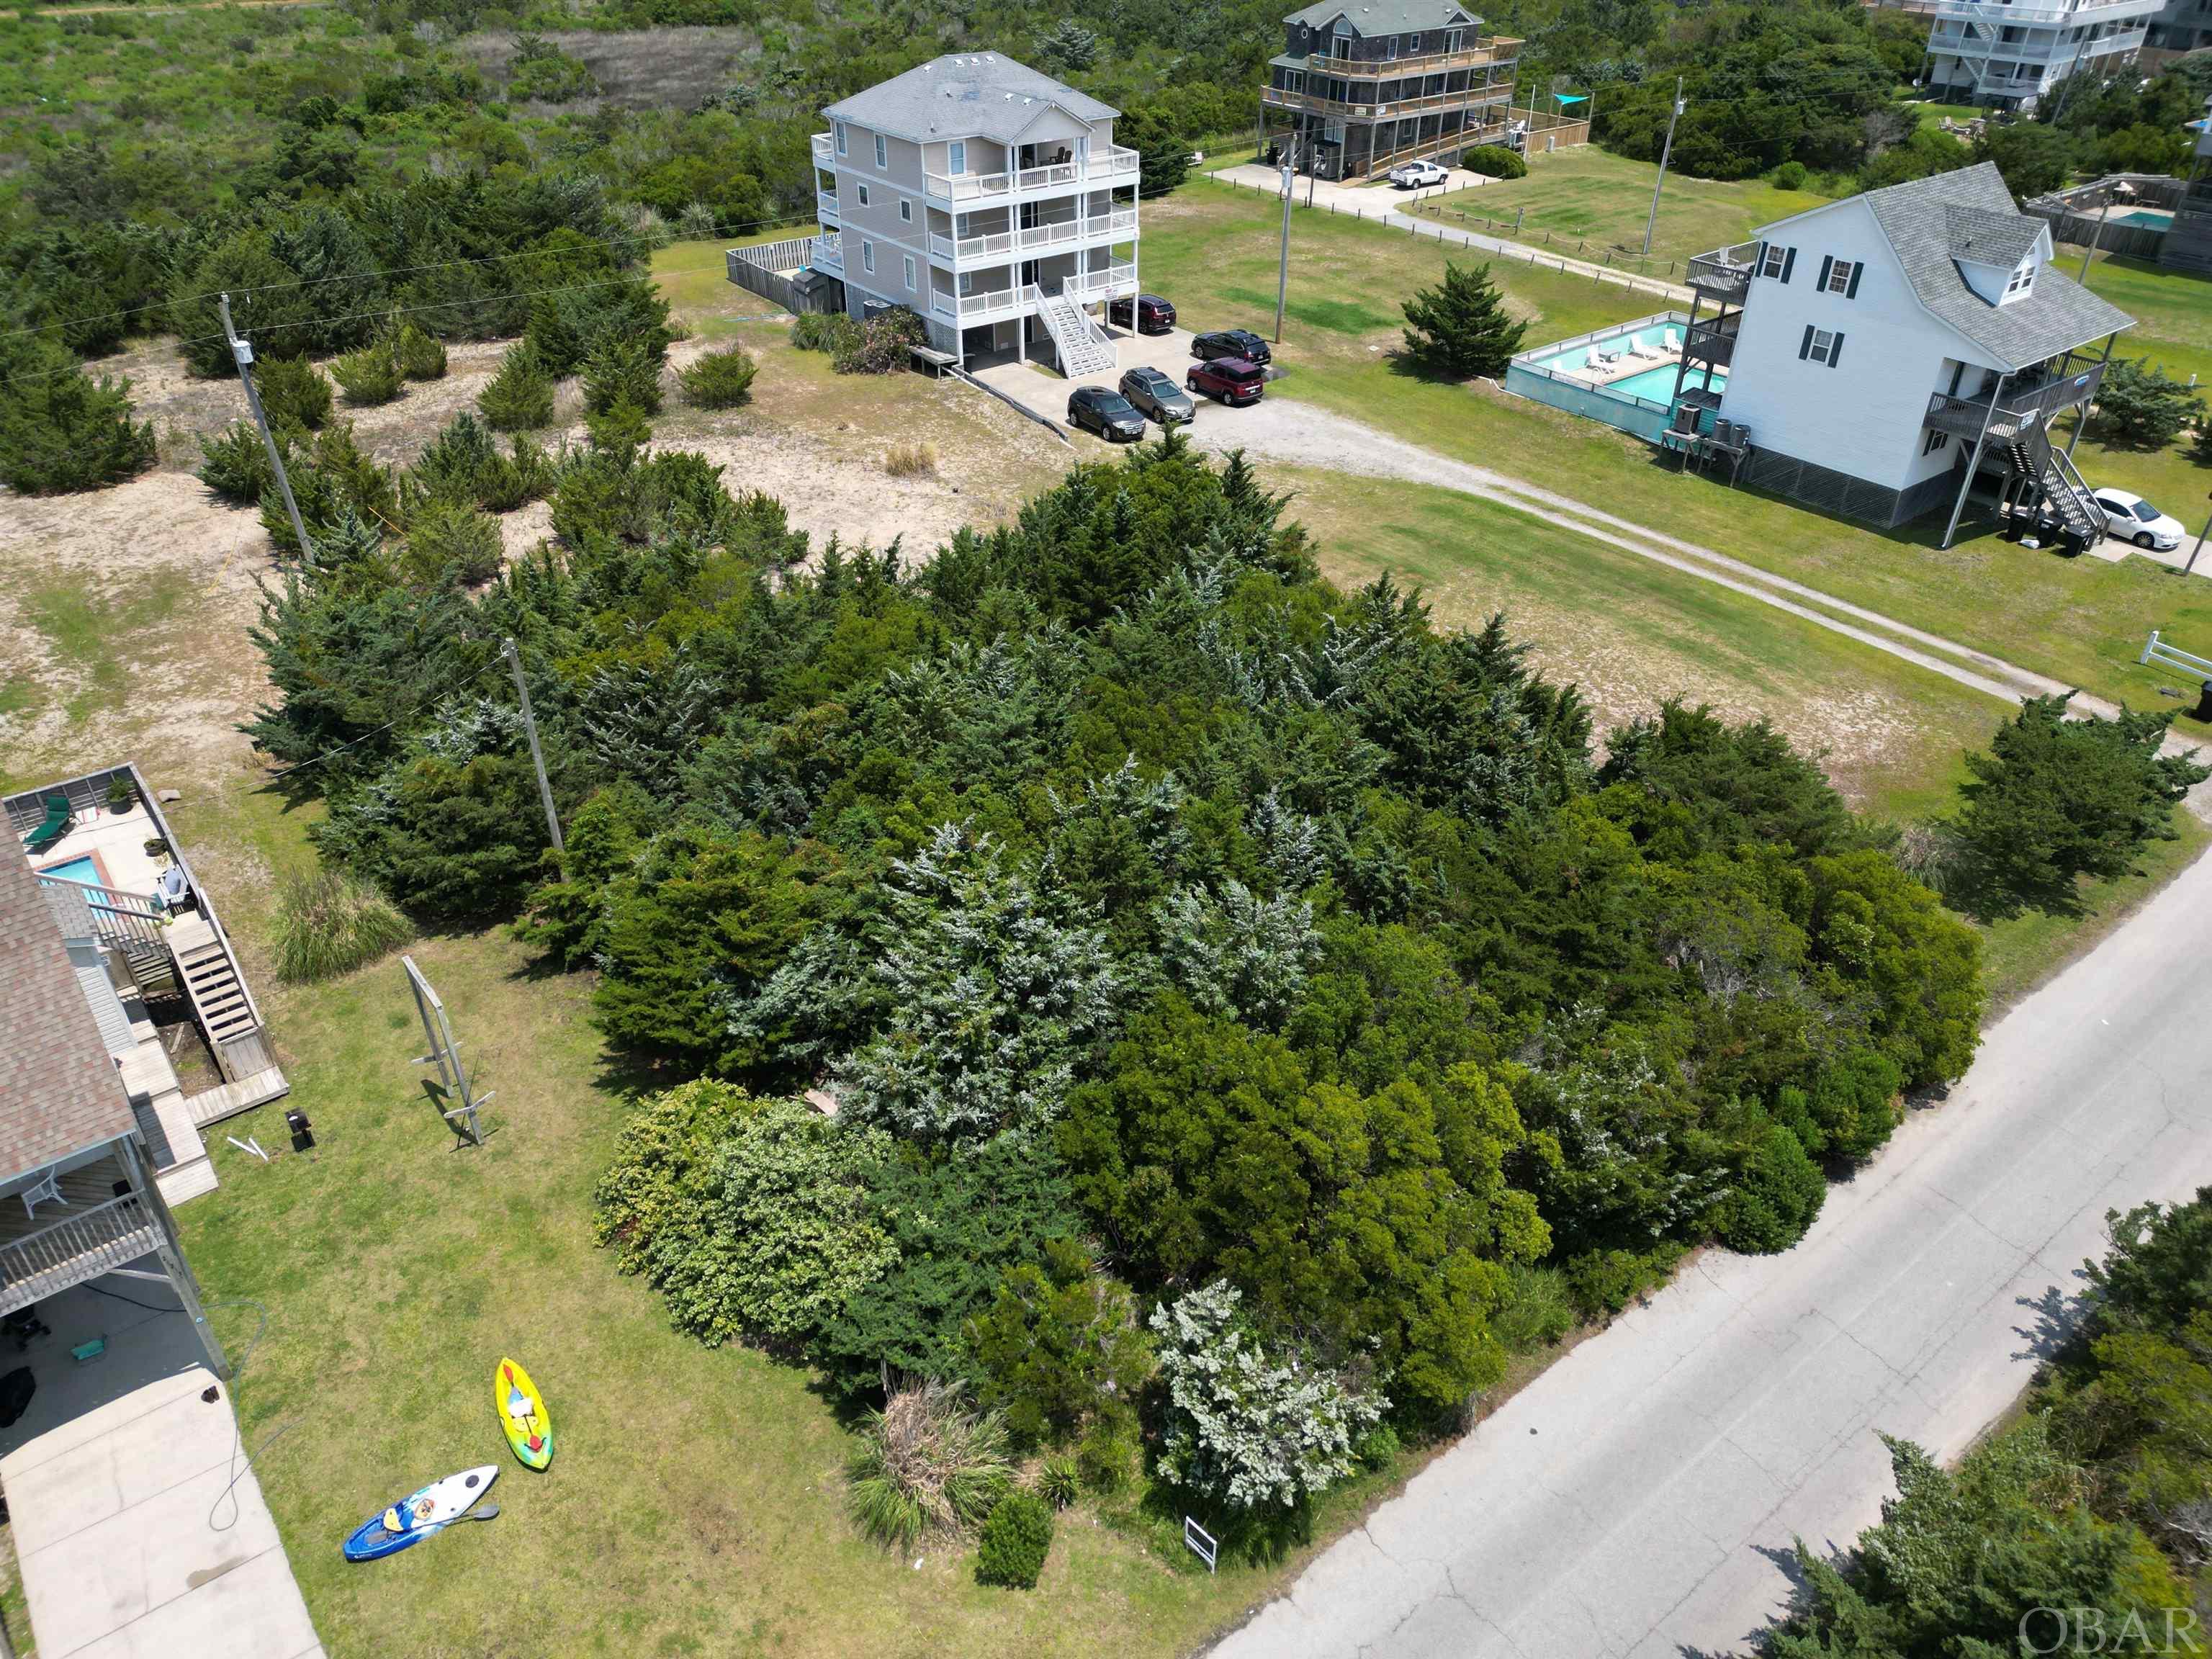 Could this be your last chance to purchase a vacant lot on this extraordinary street in Rodanthe?  Beautiful, partially wooded lot is waiting for your coastal dream home creativity. Short walk to the prestine beach, potential for glistening ocean water views and stunning sunset views; yet close to all of the shopping, restaurants, pier and countless water sport activities.  Don’t let this opportunity slip by you!